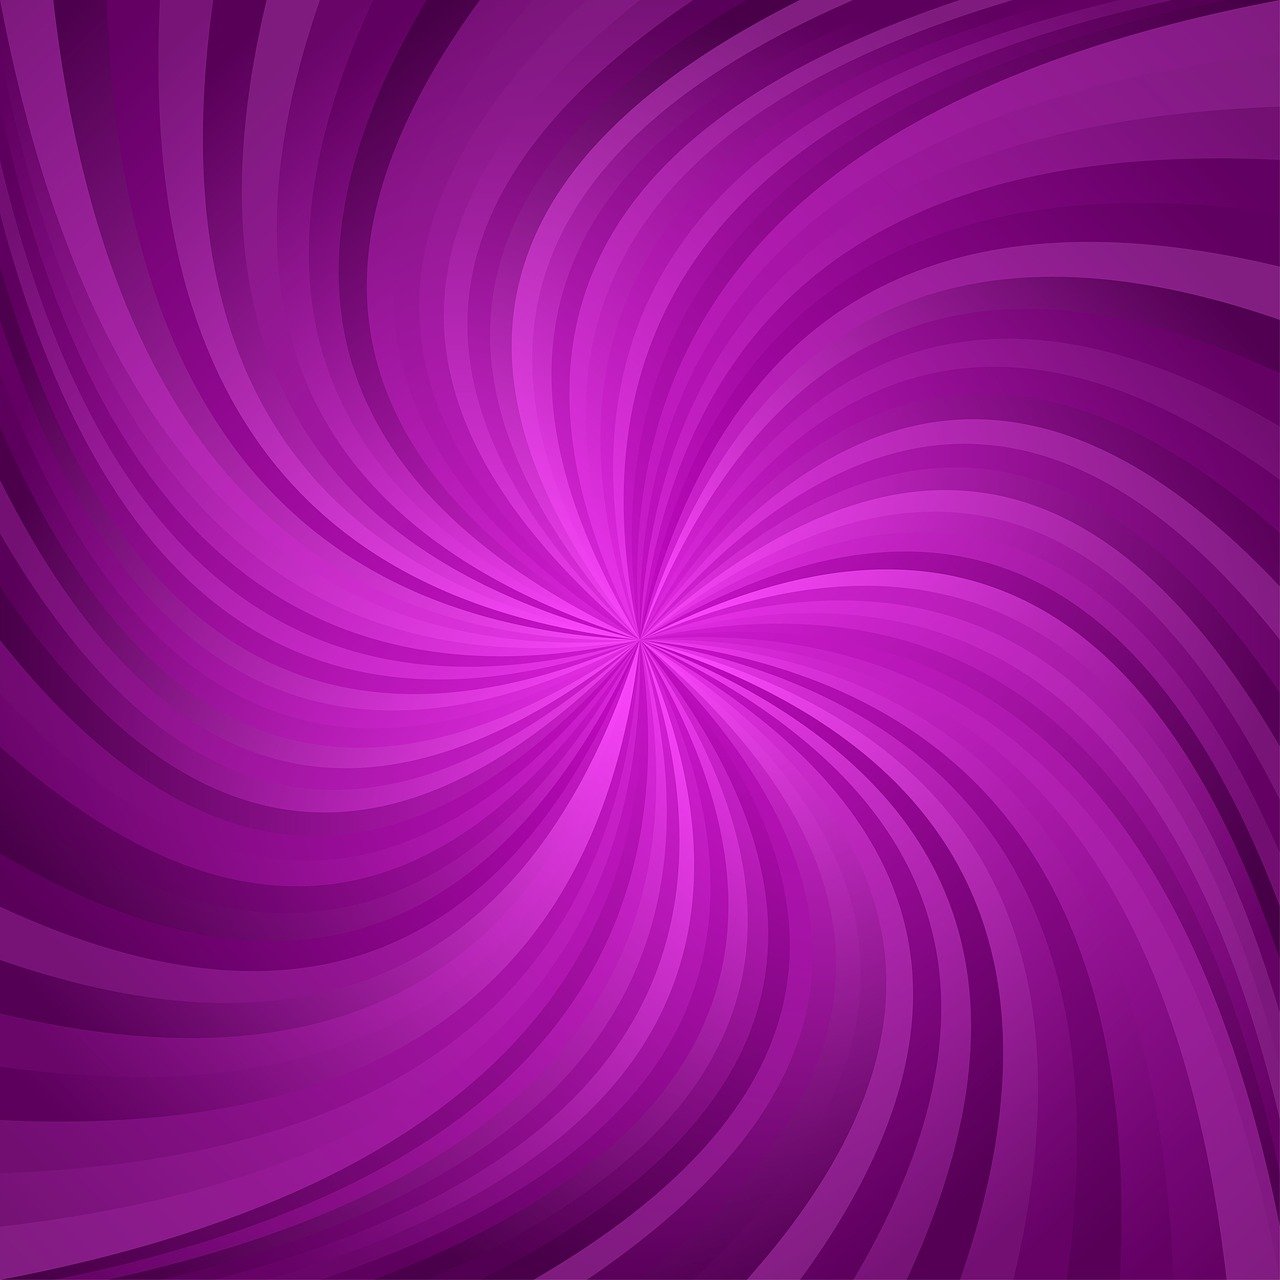 a purple background with a spiral design, shutterstock, twisted rays, vector illustration, background image, red-purple gradient map